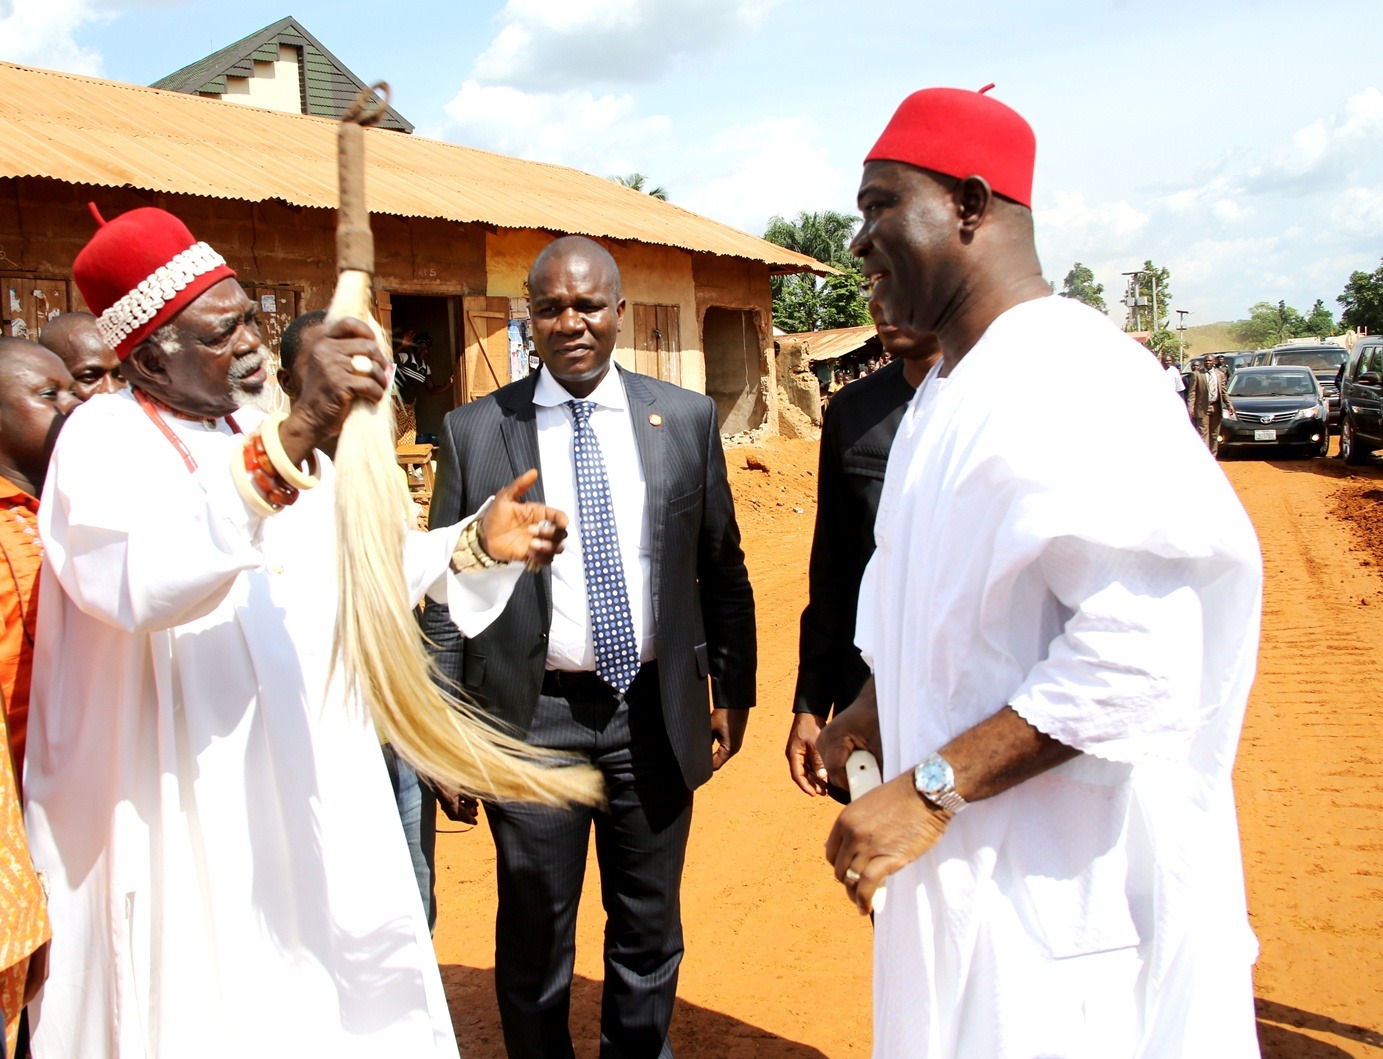 The Deputy President of the Senate, Chief Ike Ekweremadu being welcomed to Oduma by the Chairman, Traditional Rulers Council, Aninri LGA, HRM, Igwe Godwin Nwanjoku the reception and conferment of chieftaincy title of Dike Eji Ejemba on the Deputy President of the Senate by Oduma Community, Aninri Local Government Area, Enugu State at the weekend. PHOTO: OFFICE OF THE DSP